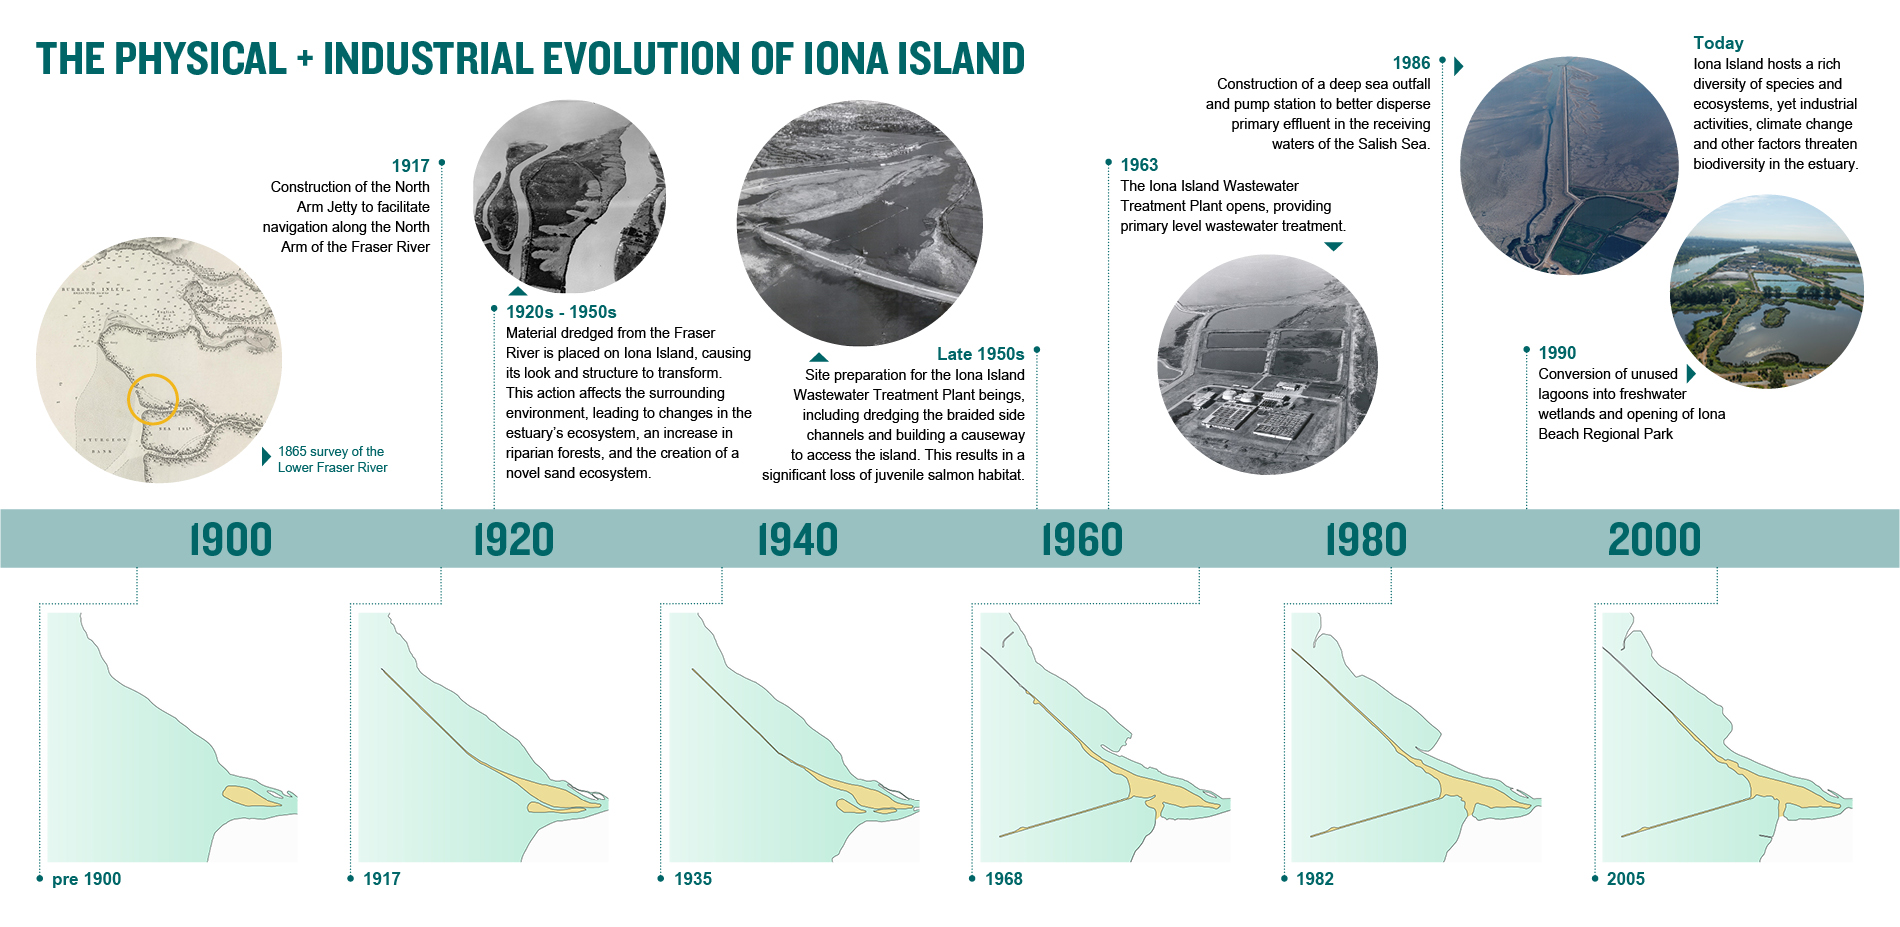 The Physical and Industrial Evolution of Iona Island